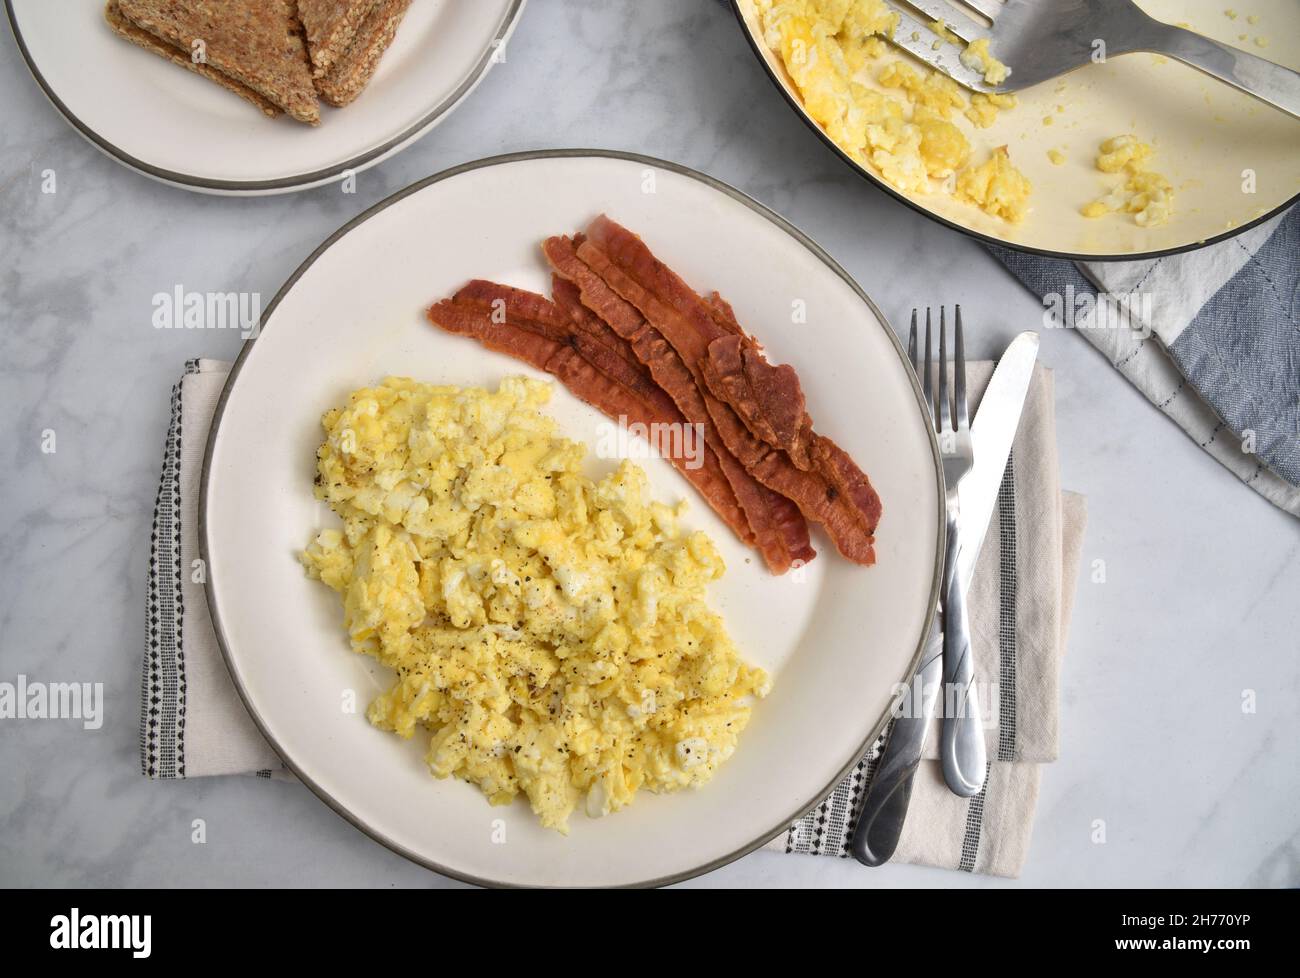 Overhead view of a bacon and egg breakfast with whole grain toast Stock Photo